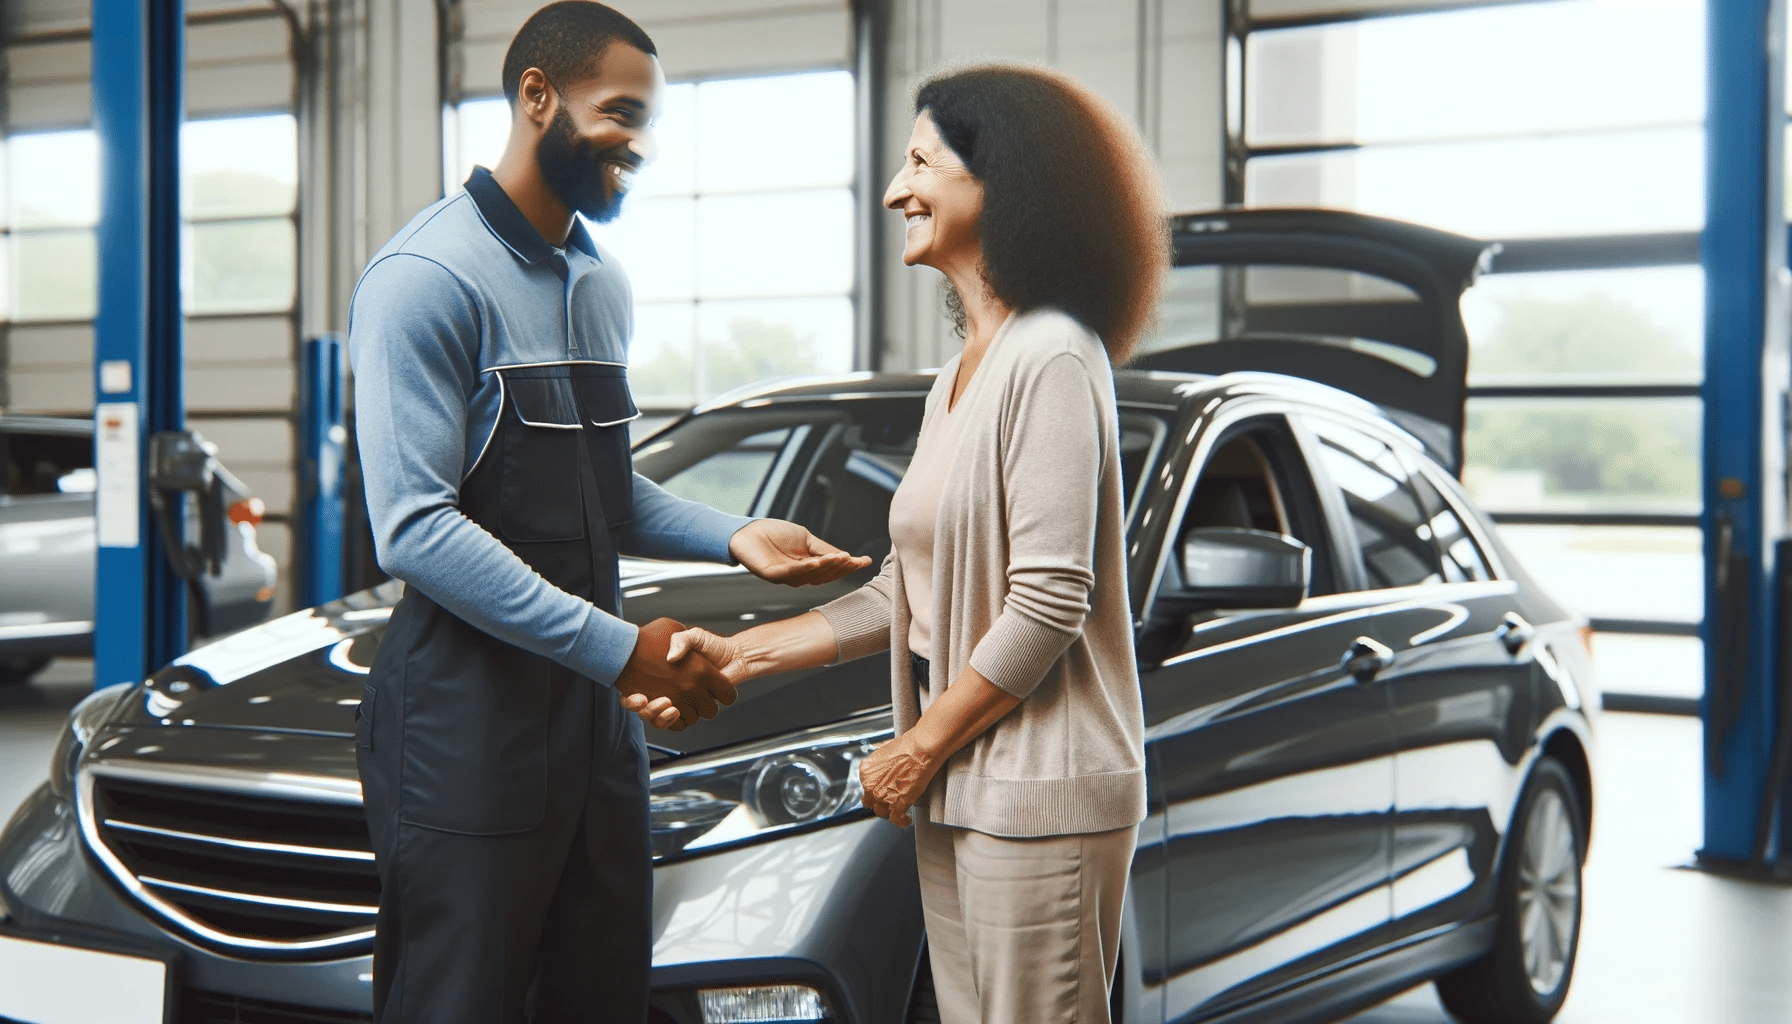 A-satisfied-customer-shaking-hands-with-a-mechanic-in-front-of-a-car-